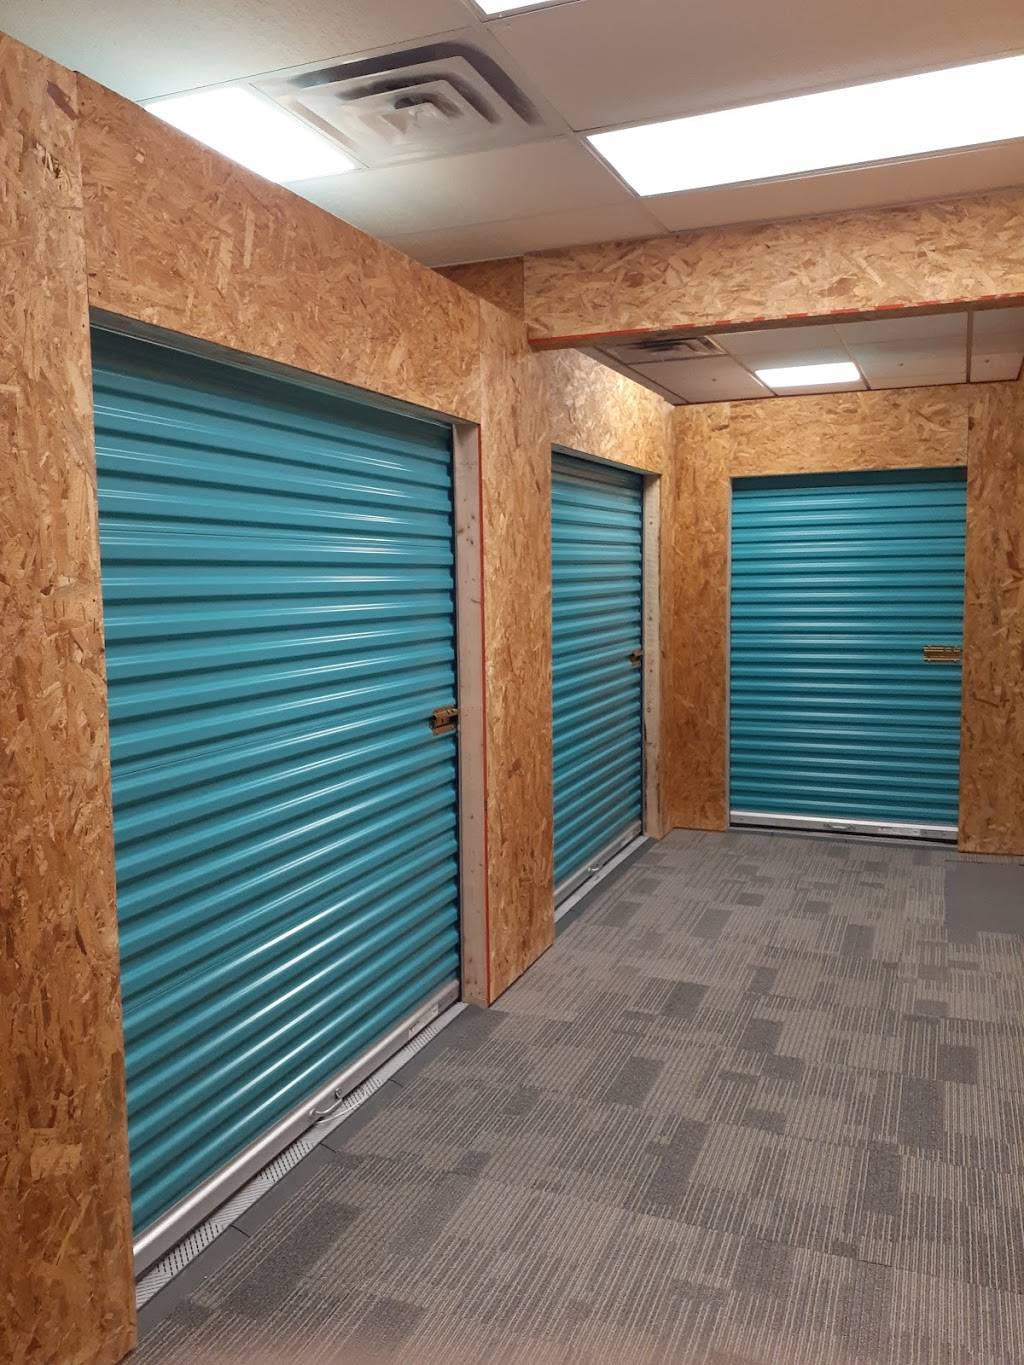 PRO Self Storage - Climate Controlled Units | 7916 Private Rd 5960, Shallowater, TX 79363 | Phone: (806) 470-8424